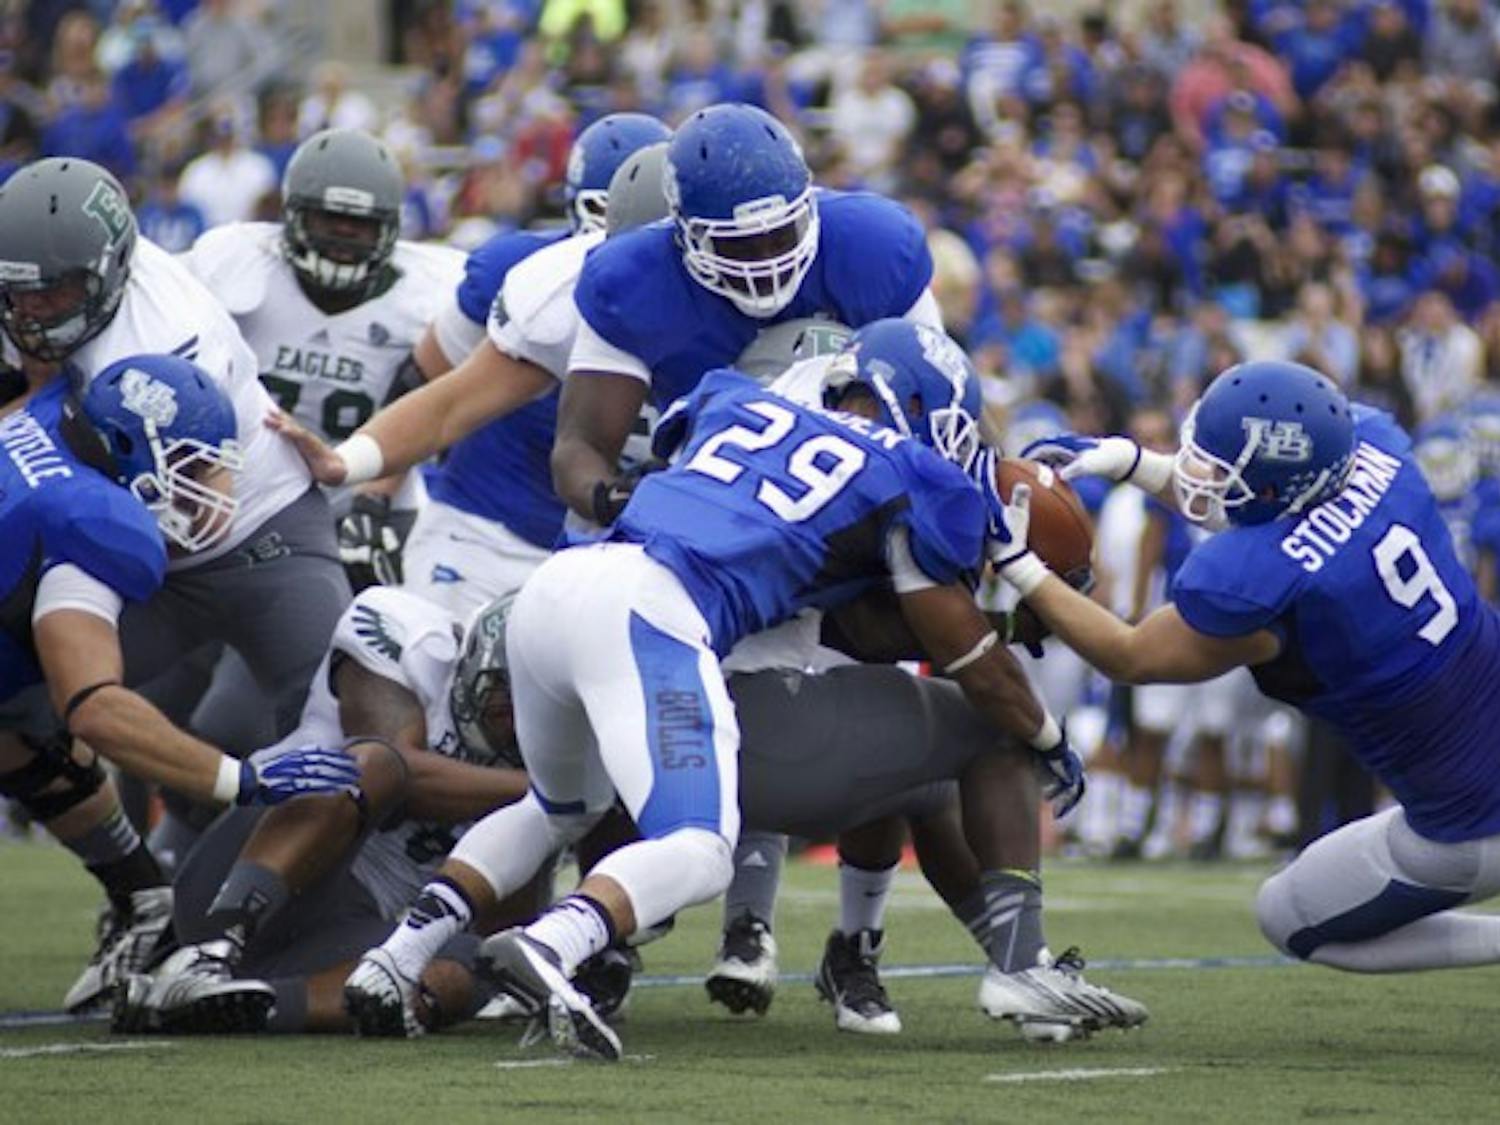 The Bulls defense forces a fumble on Eastern Michigan in the their 42-14 victory over the Eagles on Oct. 5 2013 in UB Stadium. Buffalo faces the Eagles Saturday in Ypsilanti, Michigan.&nbsp;Chad Cooper, The Spectrum